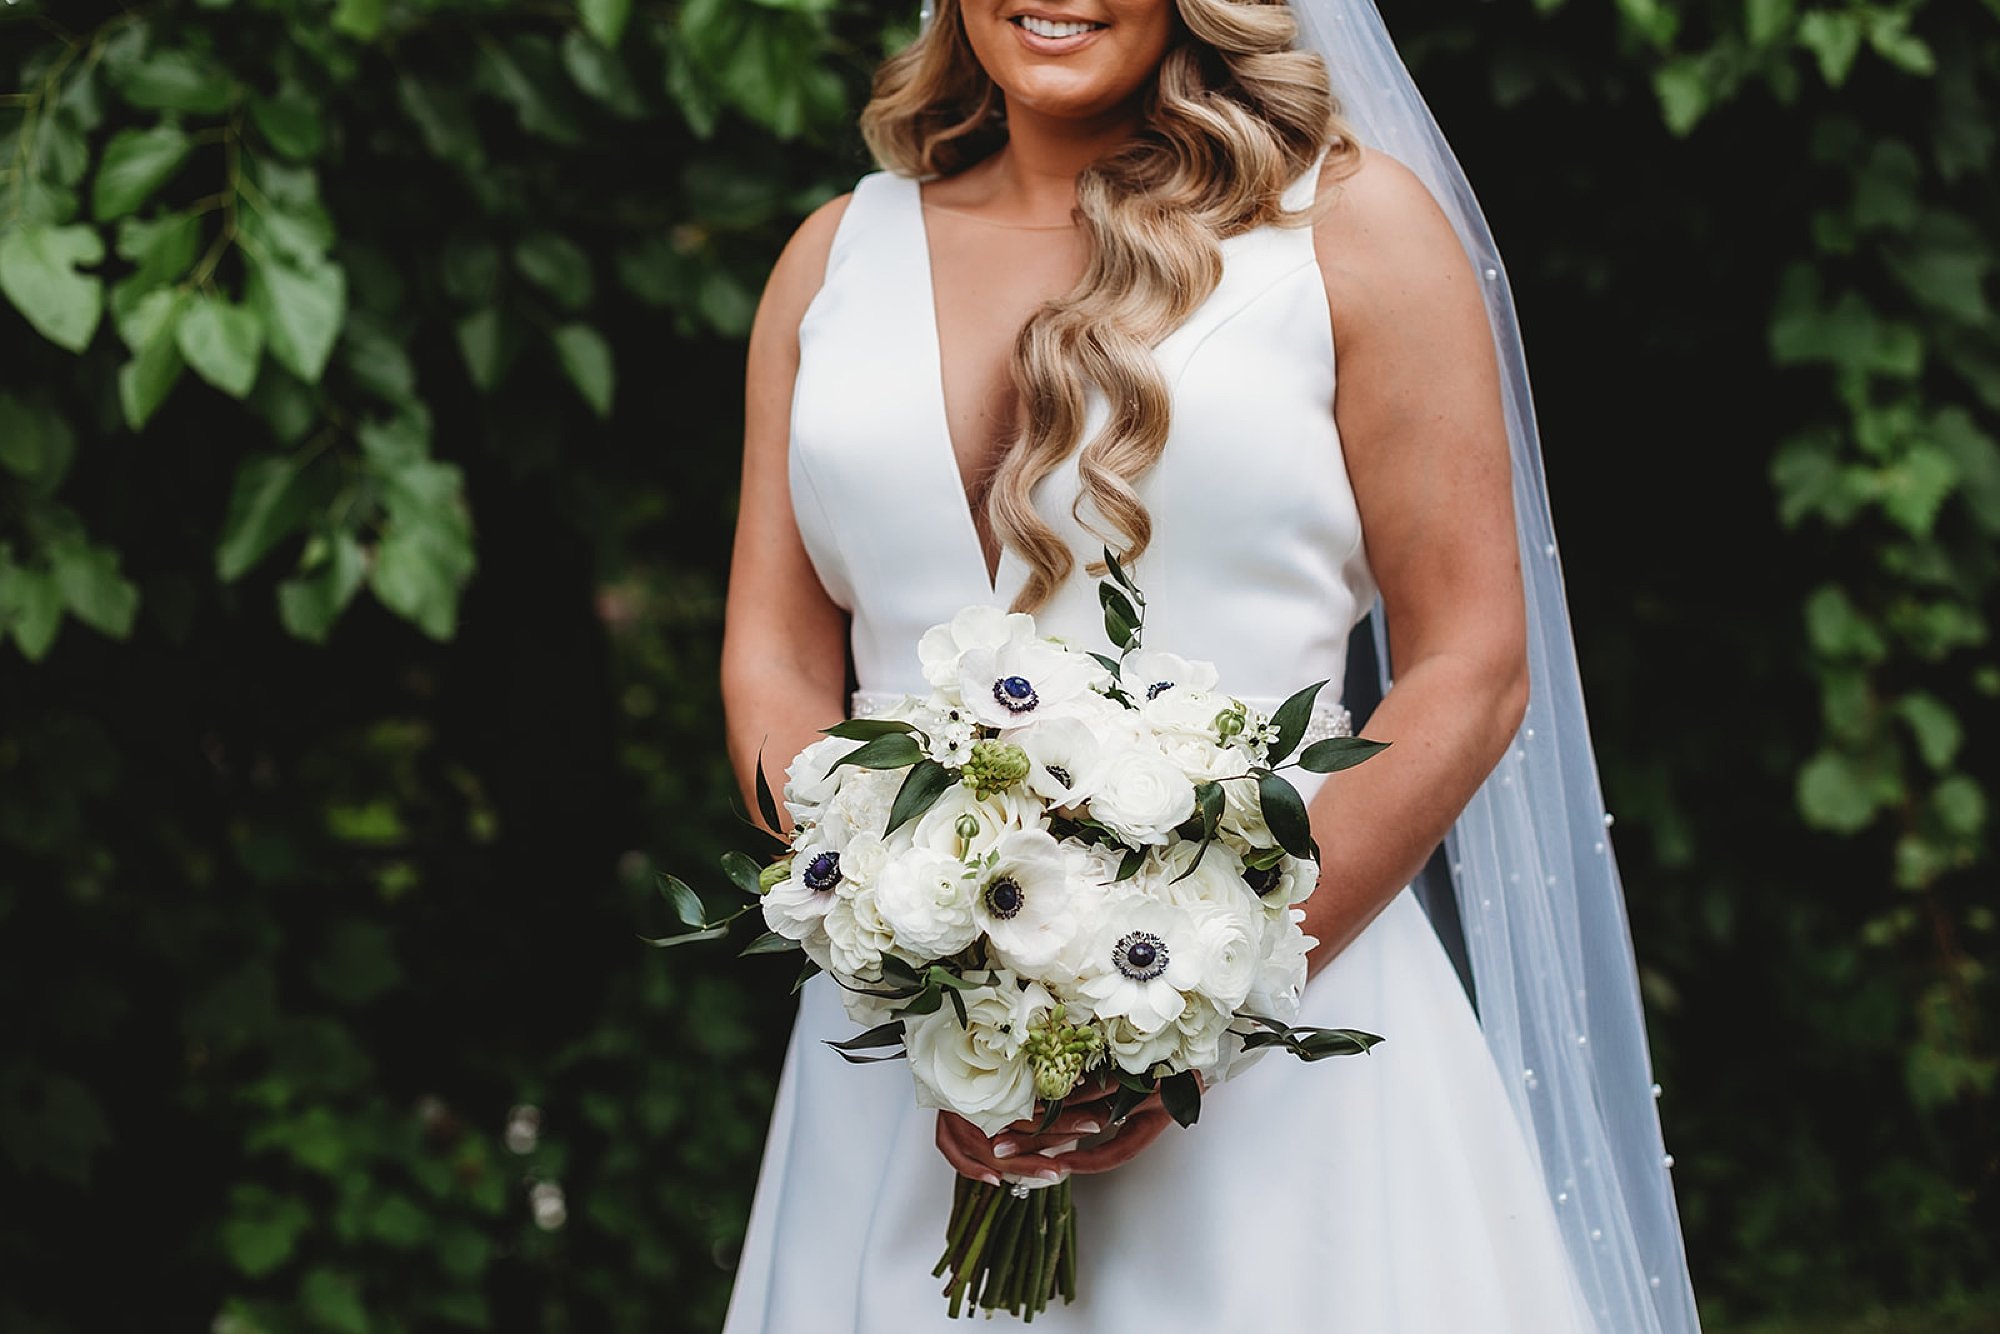 bride holds bouquet f white flowers in v-neck dress